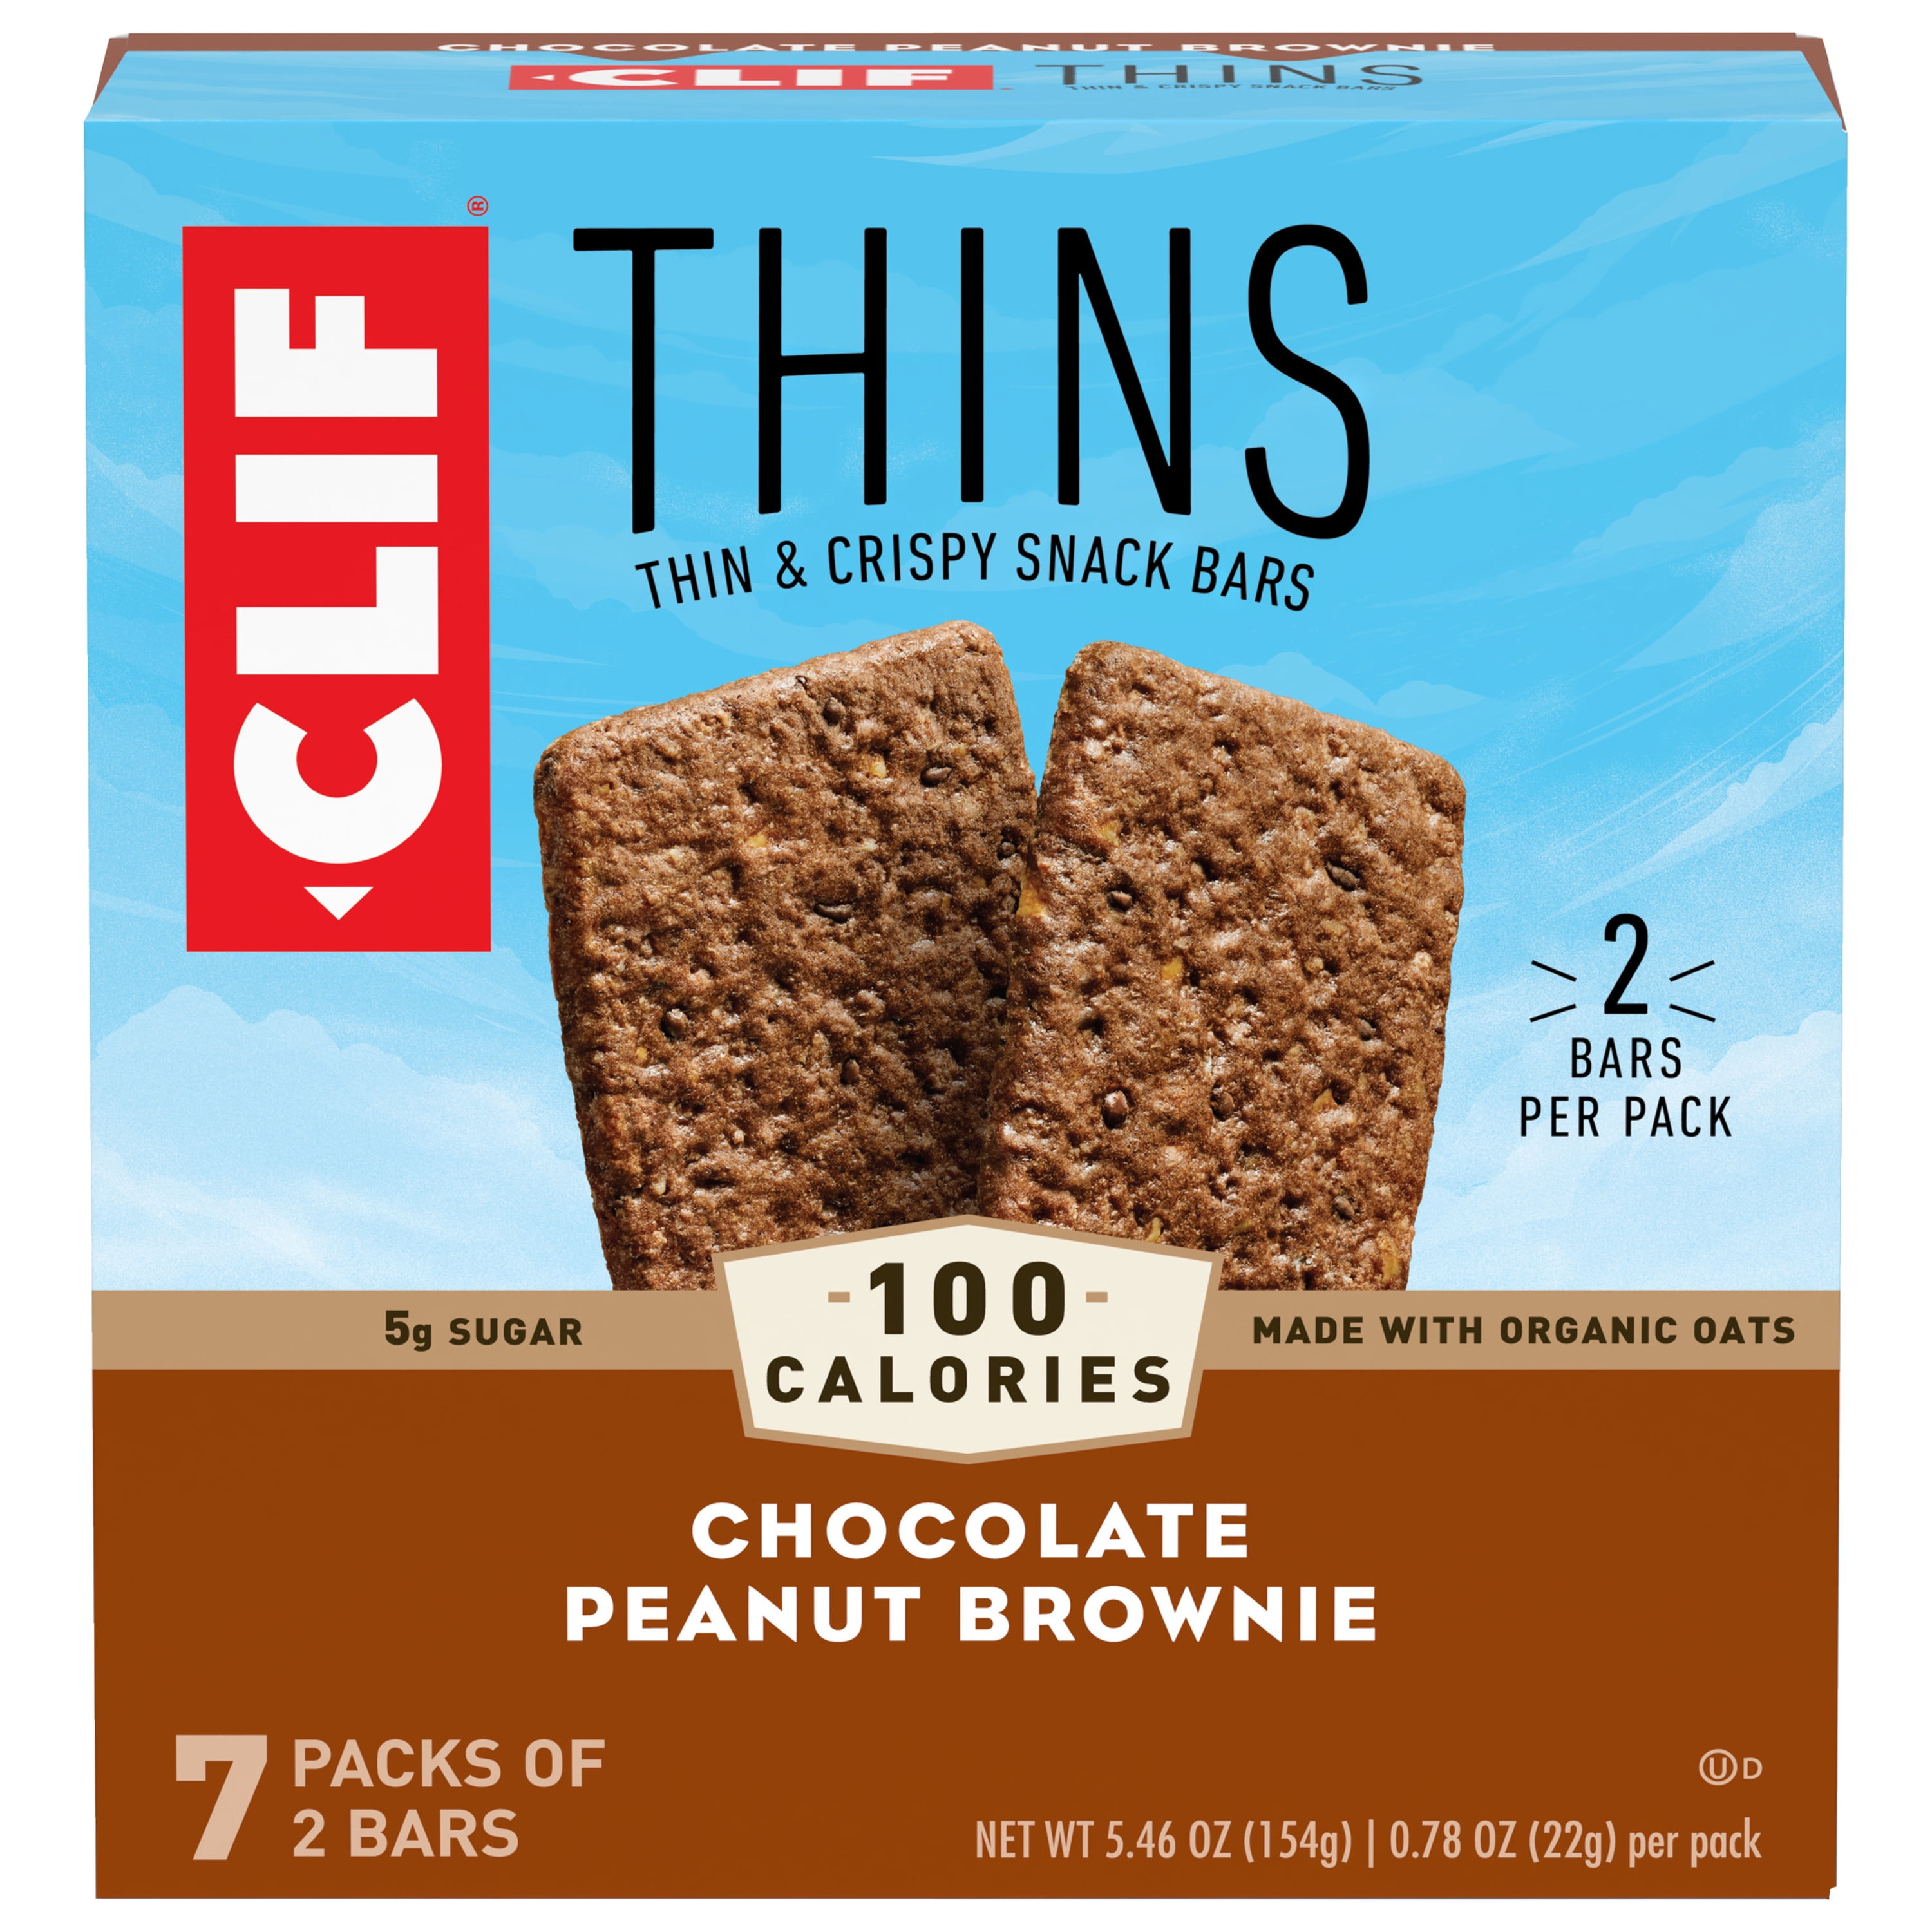 Clif Bar Thins, Snack Bars, Chocolate Peanut Brownie, 100 Calorie Packs, 7 Ct, 0.78 oz